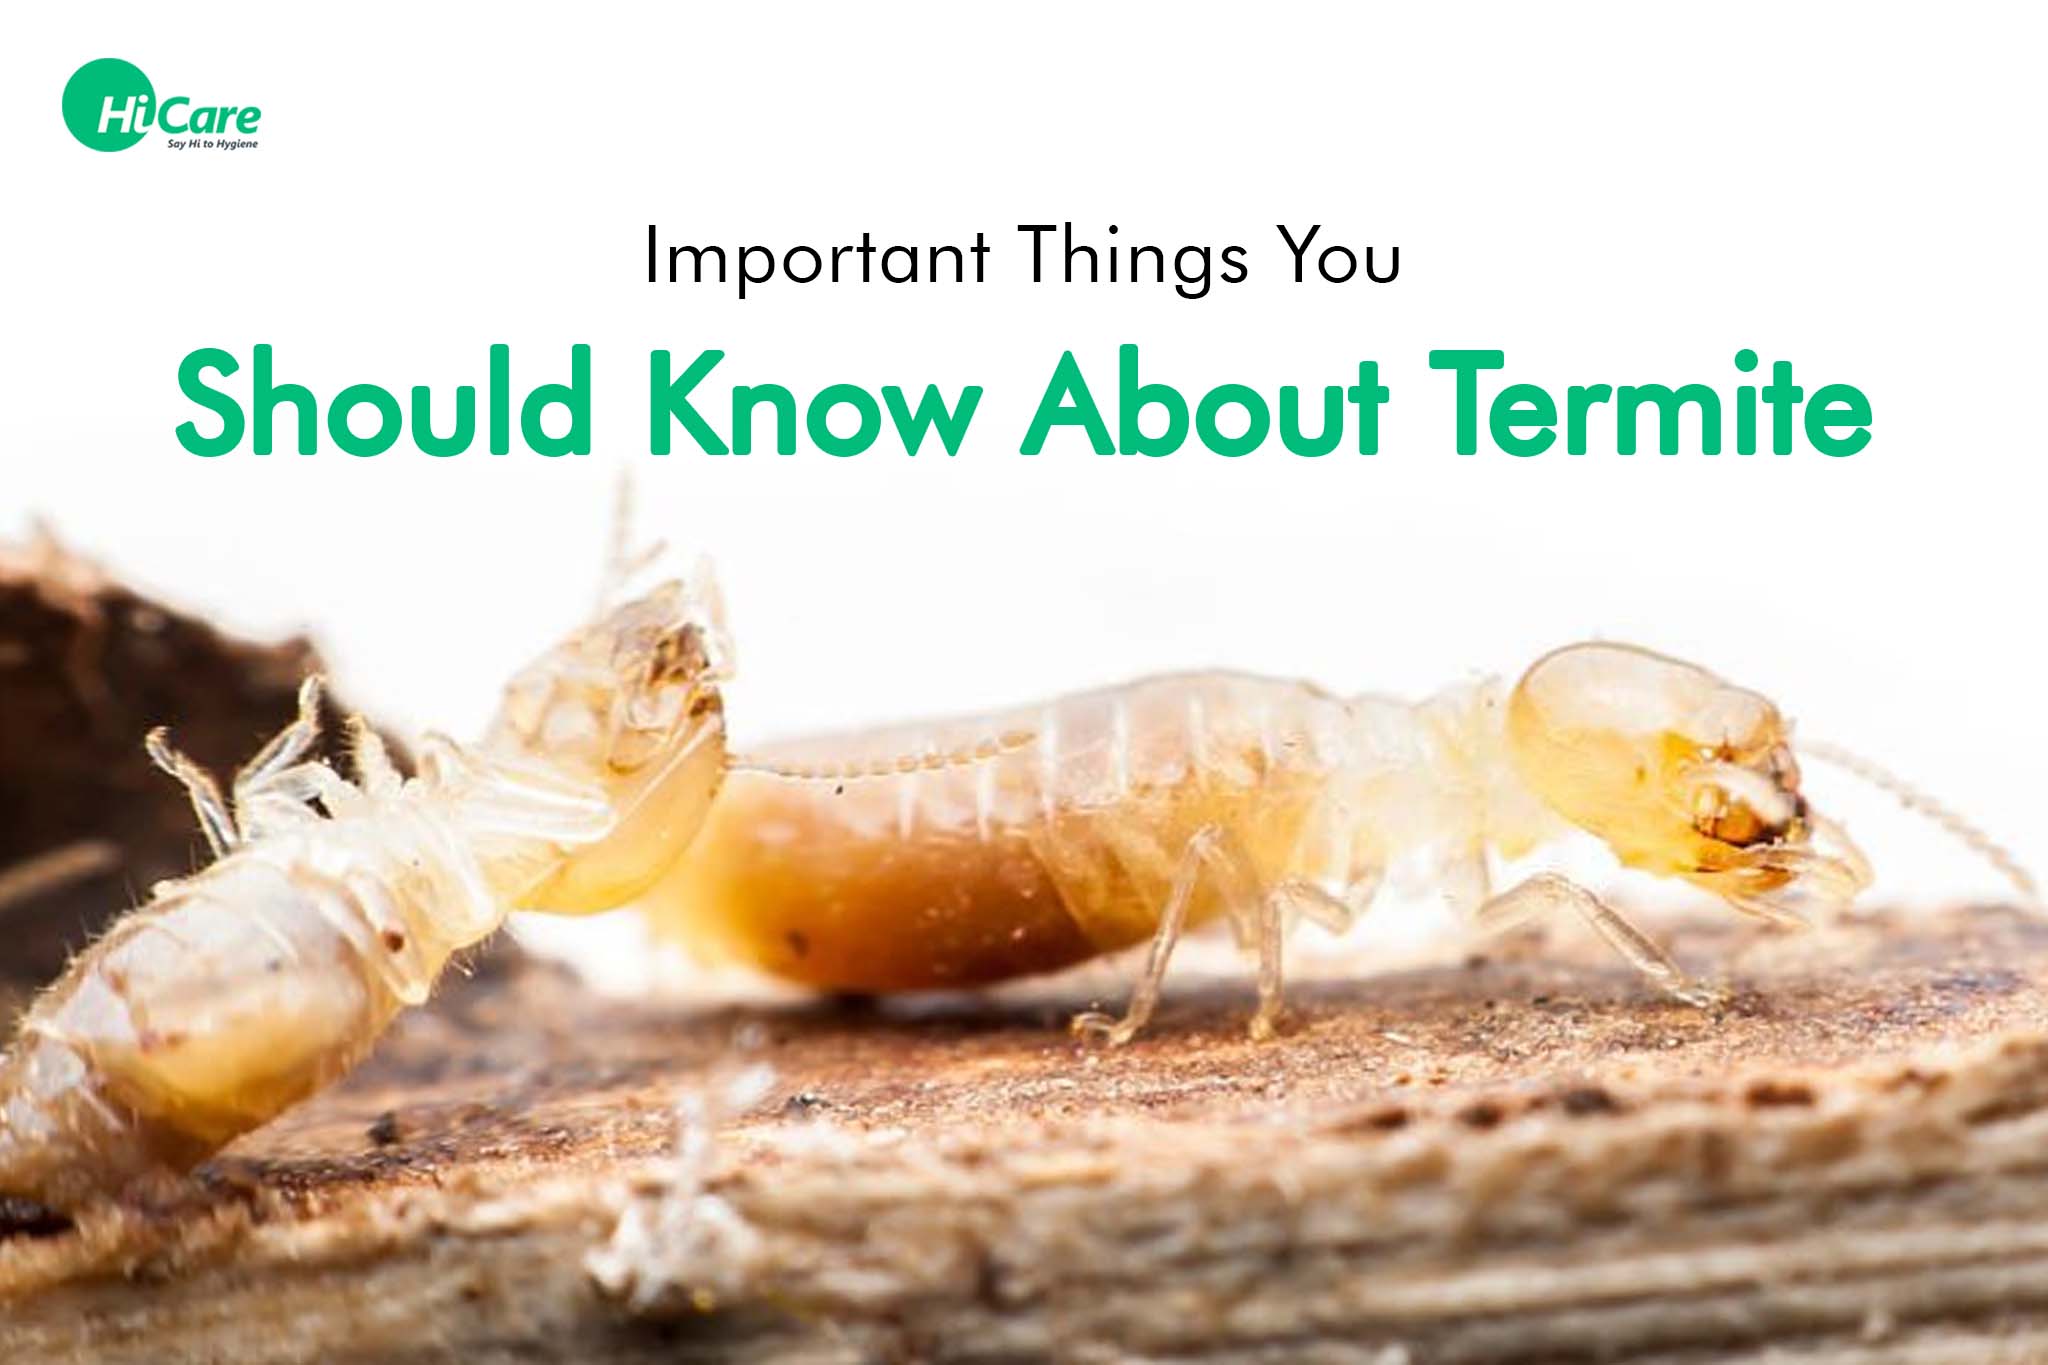 Important Things You Should Know About Termite | HiCare